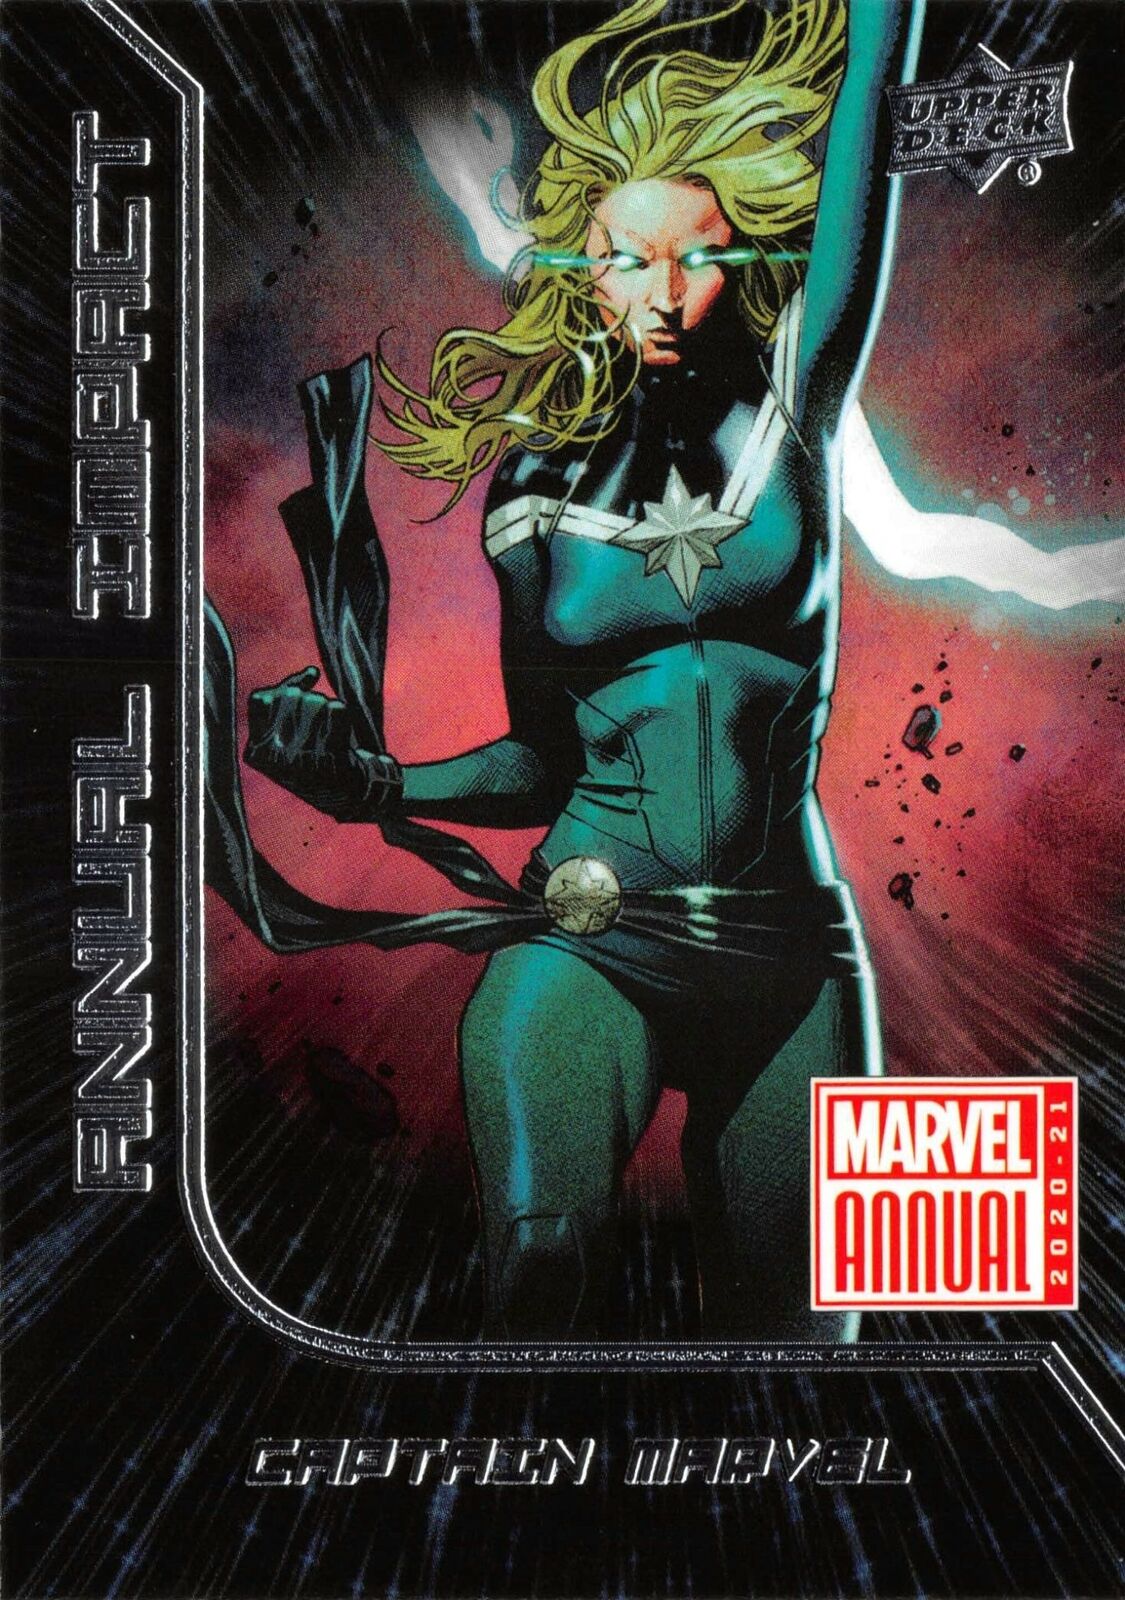 Marvel Annual 2020-21 (UD) IMPACT Trading Card Insert AI-3 / CAPTAIN MARVEL